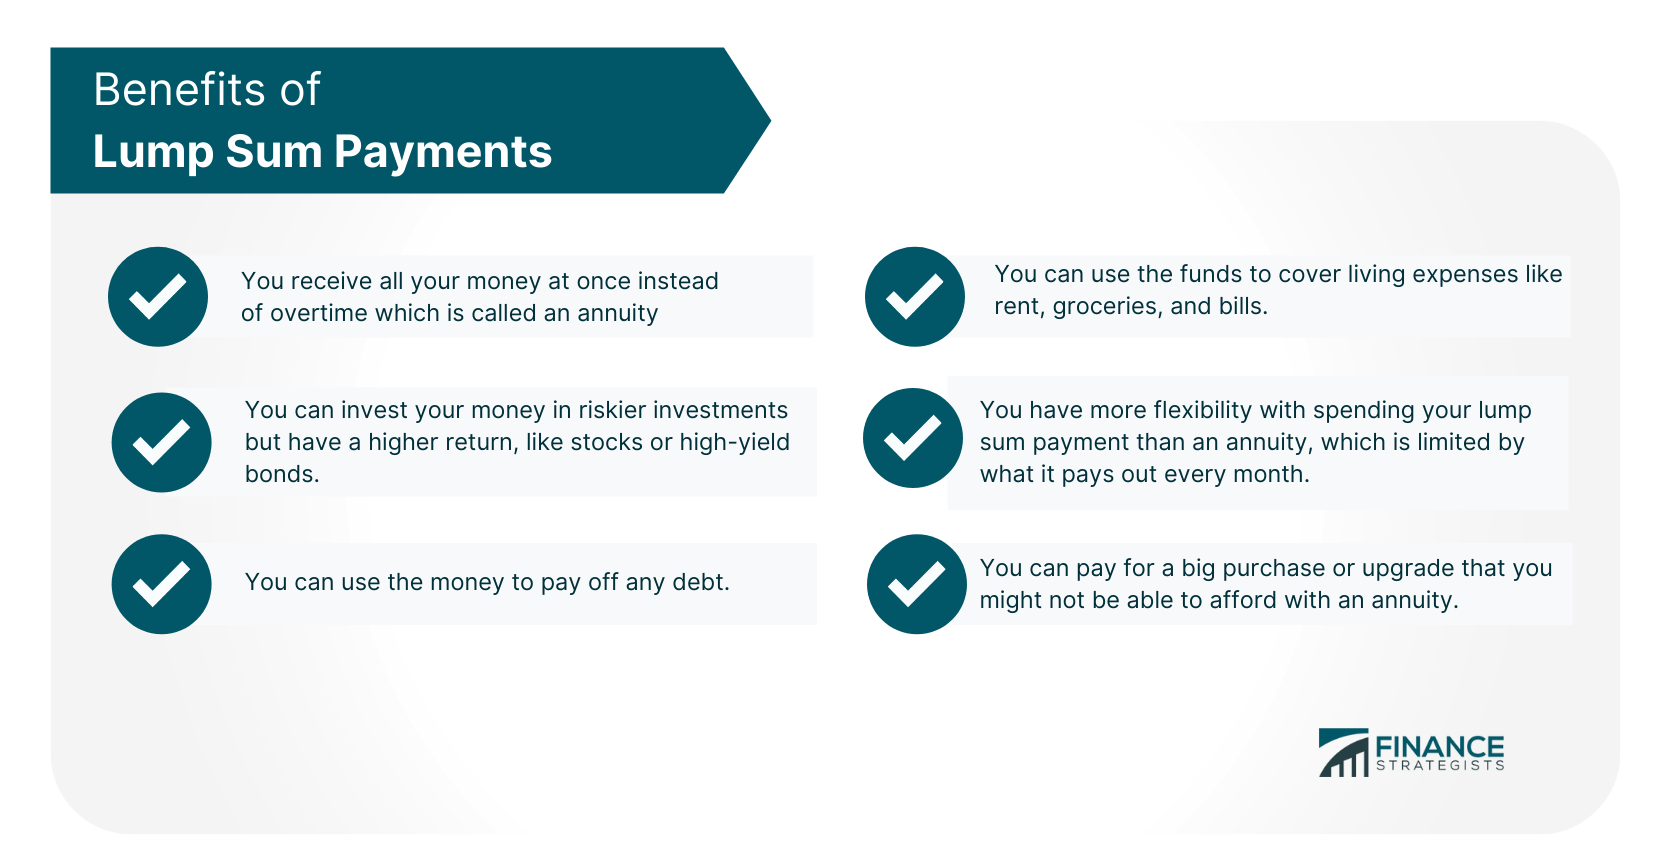 Benefits of Lump Sum Payments